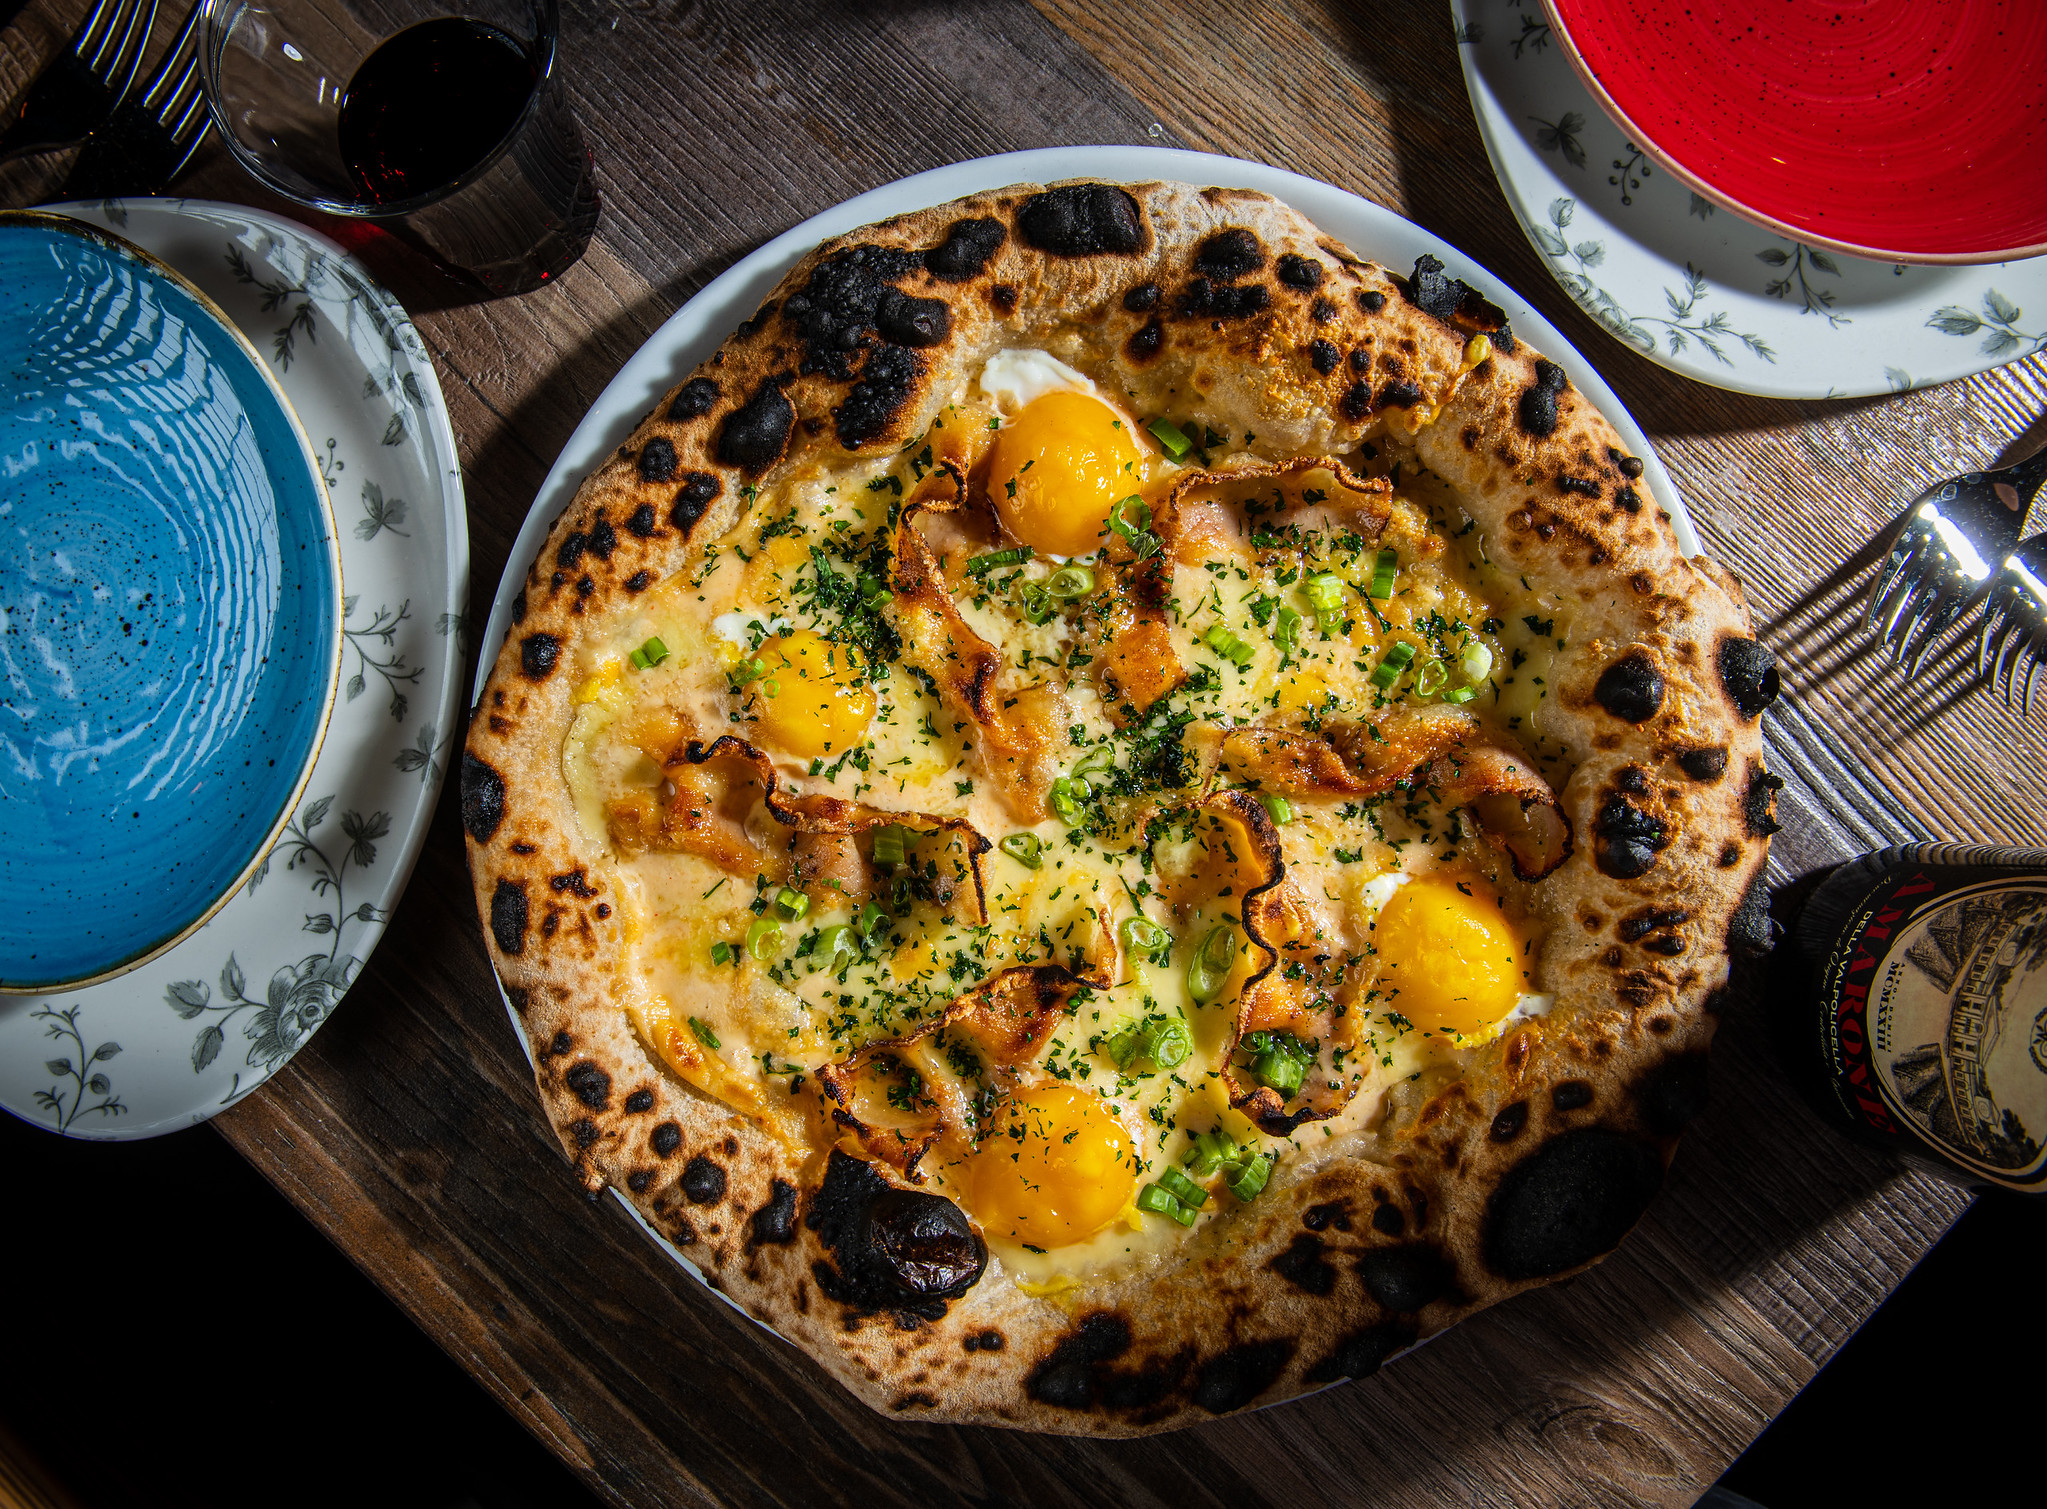 Lupo Pizzeria’s $20 carbonara pizza comes topped with pecorino cream, pork cheek, egg yolk, and a liberal sprinkling of black pepper